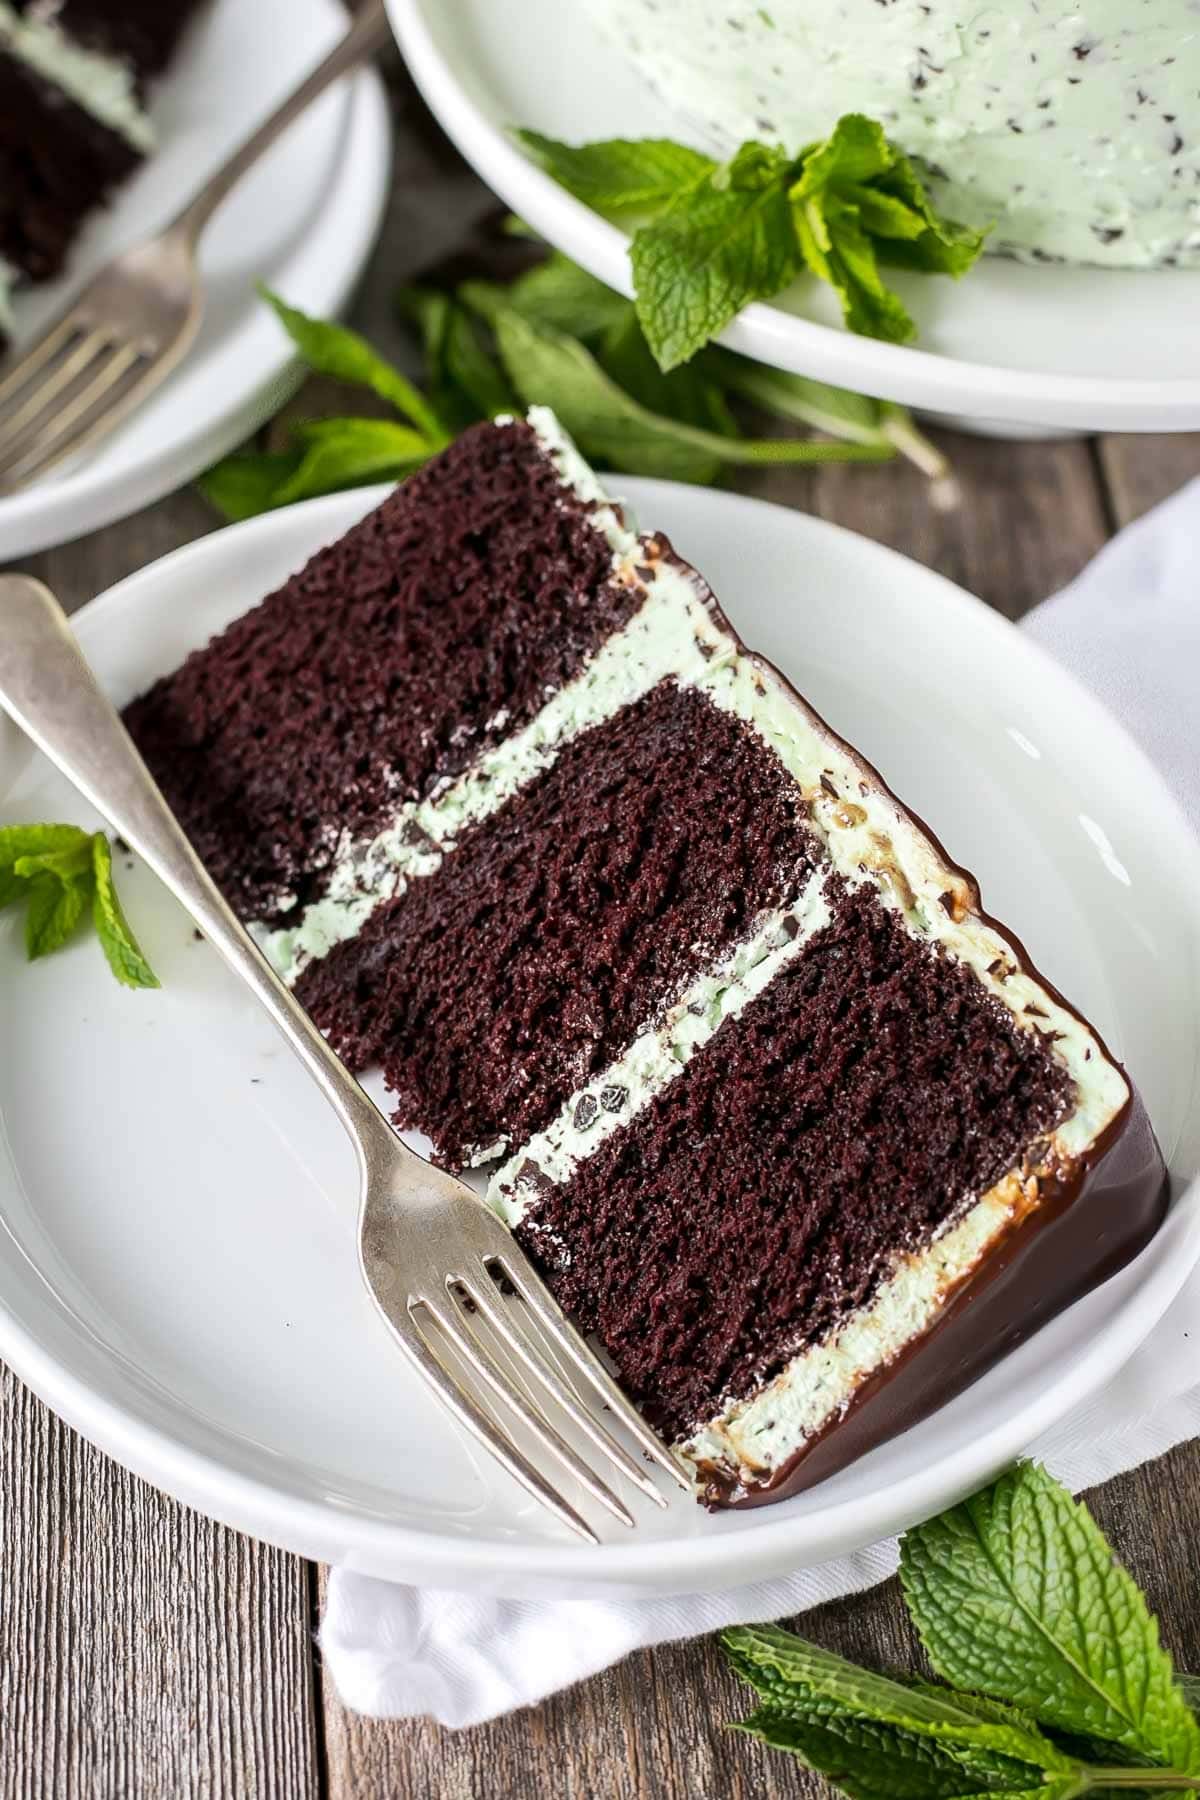 A slice of chocolate cake layered with mint frosting.